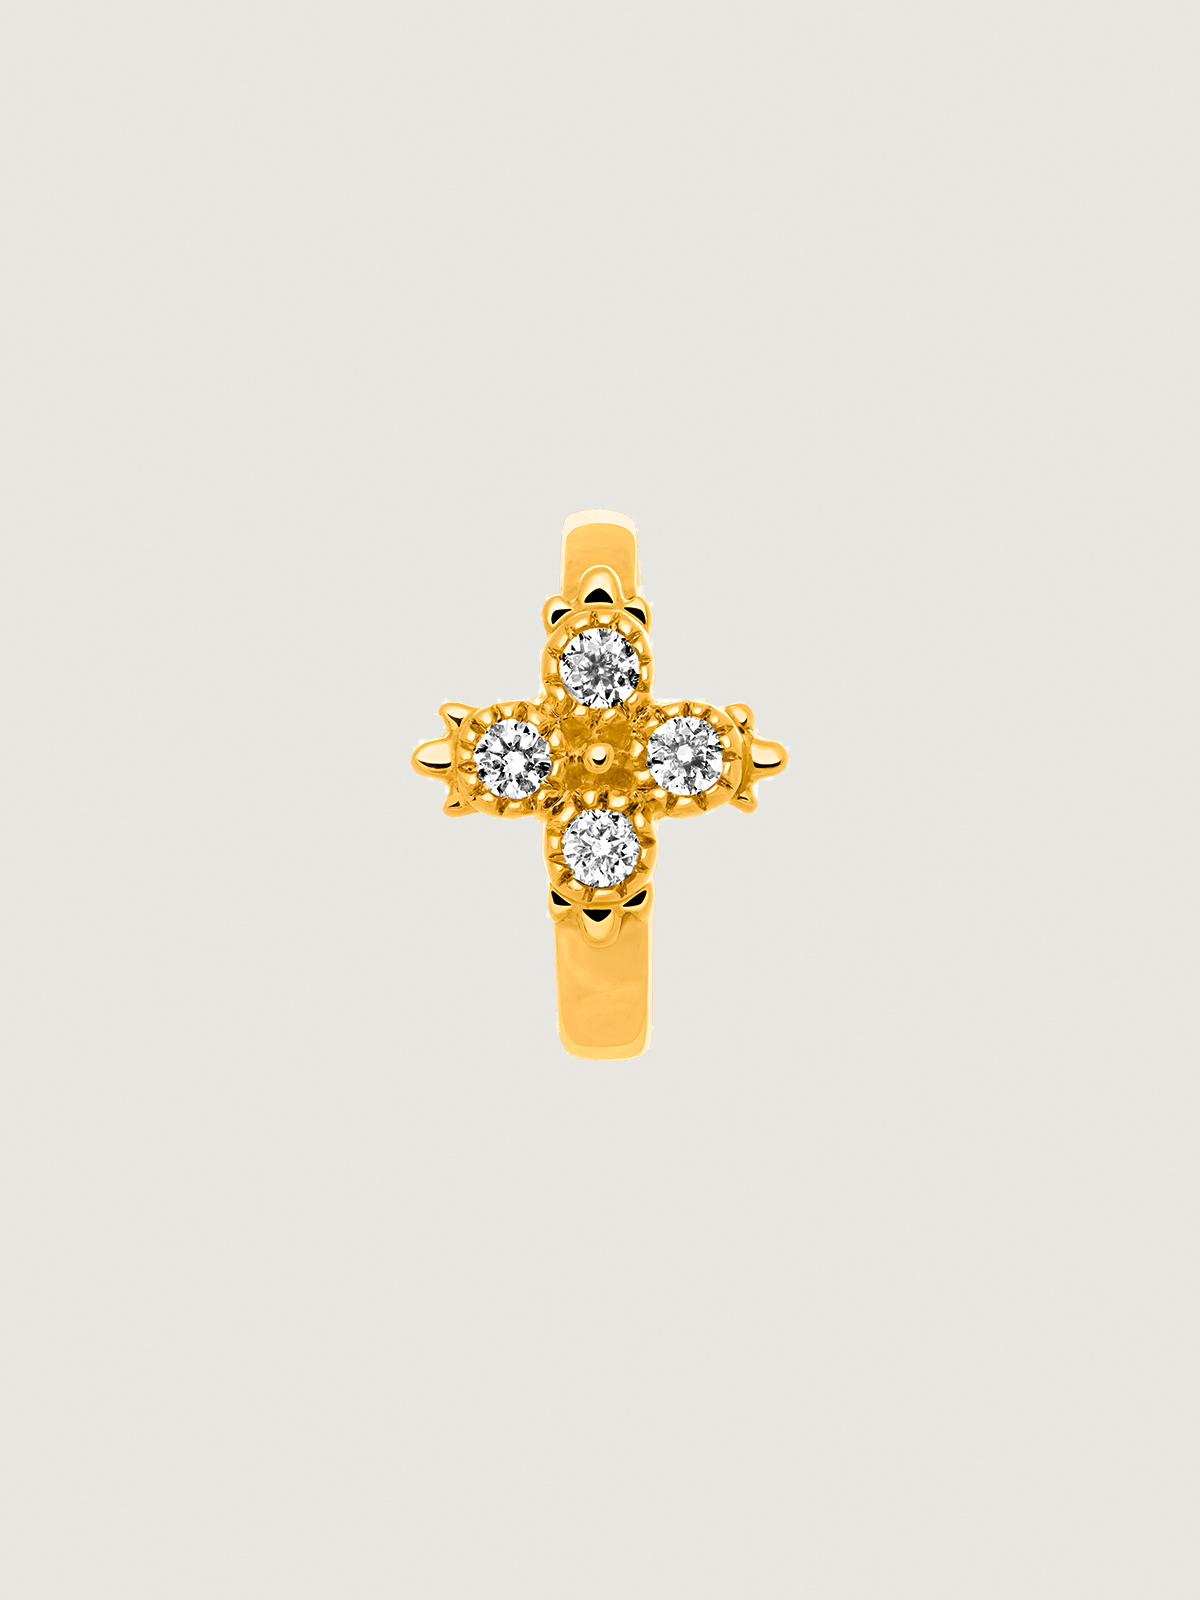 Individual small hoop earring made of 9K yellow gold with a diamond cross